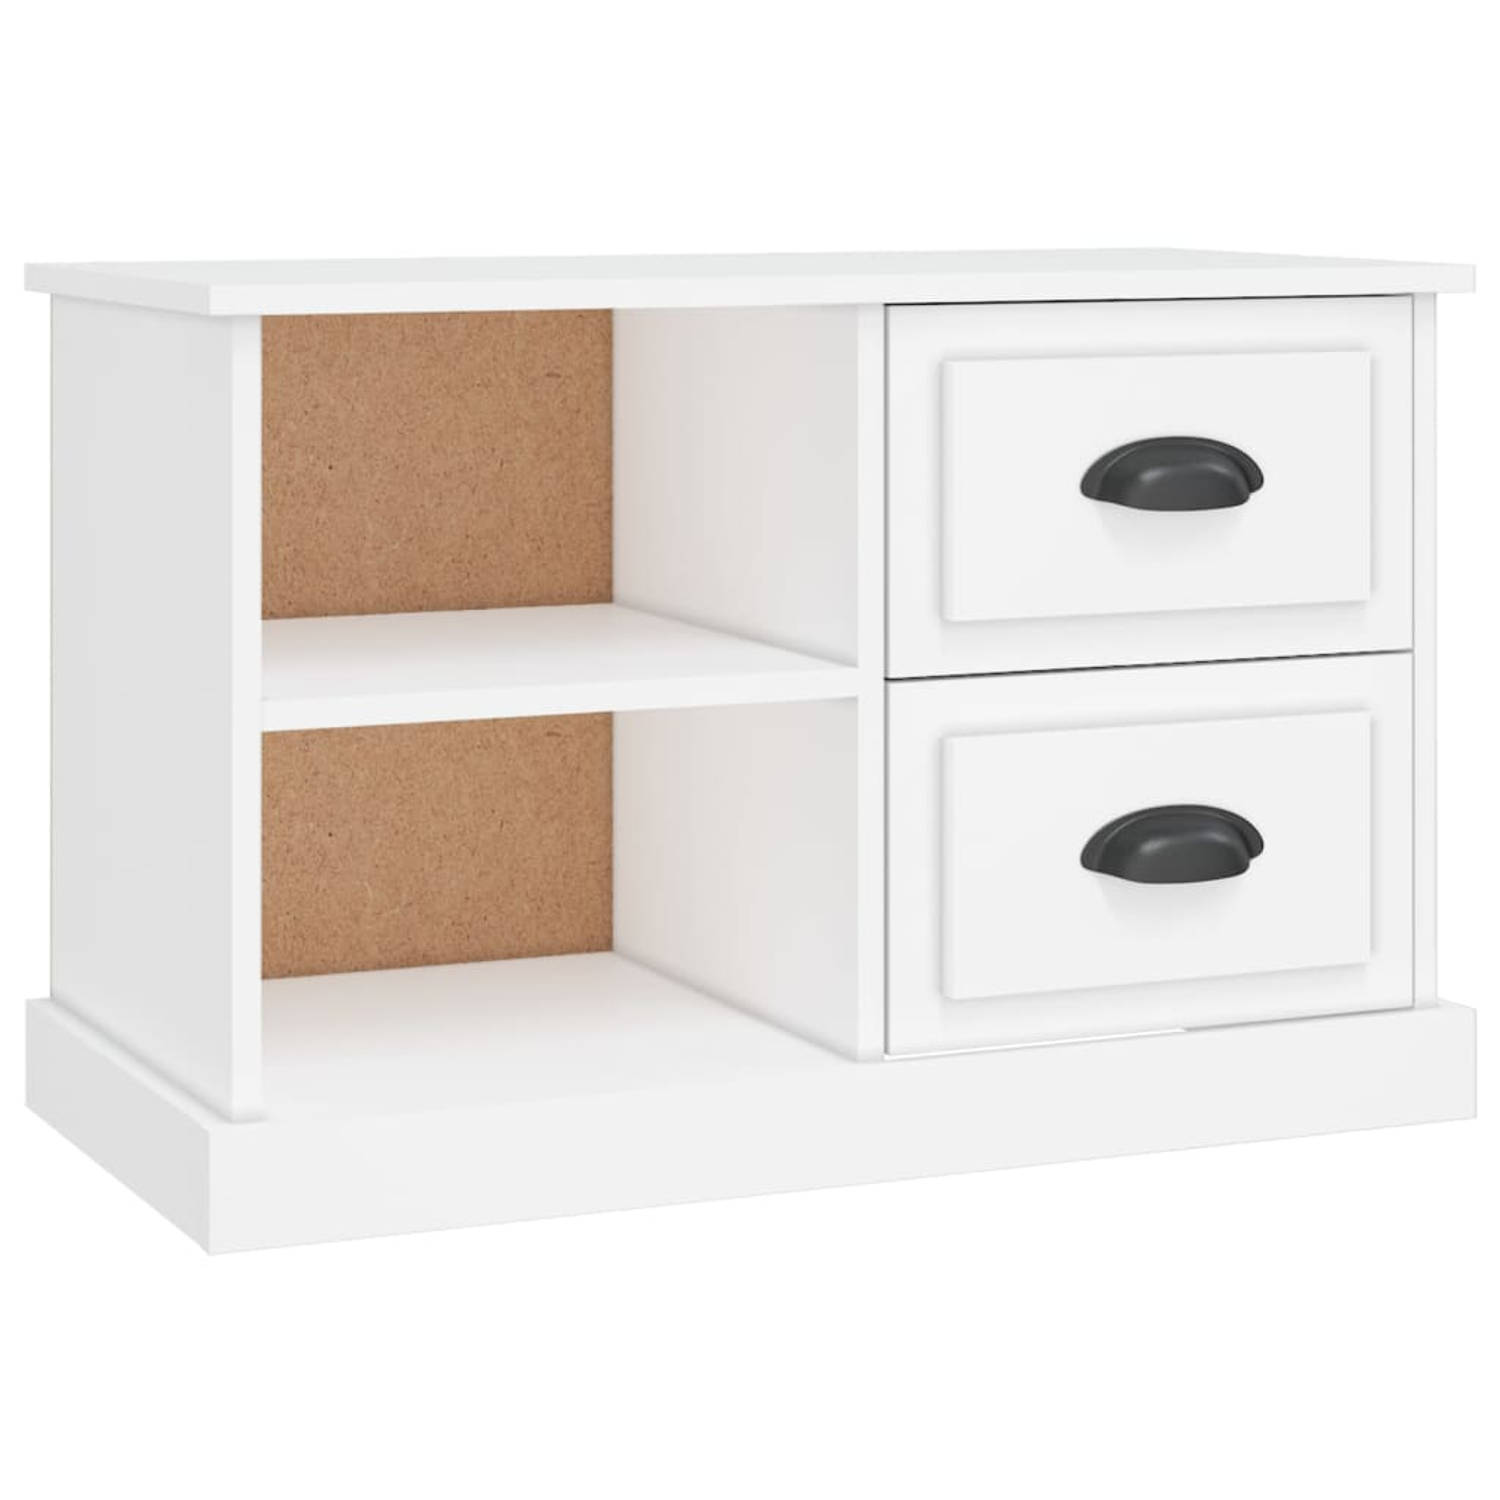 The Living Store TV-kast Trendy - Hout - 73 x 35.5 x 47.5 cm - Wit